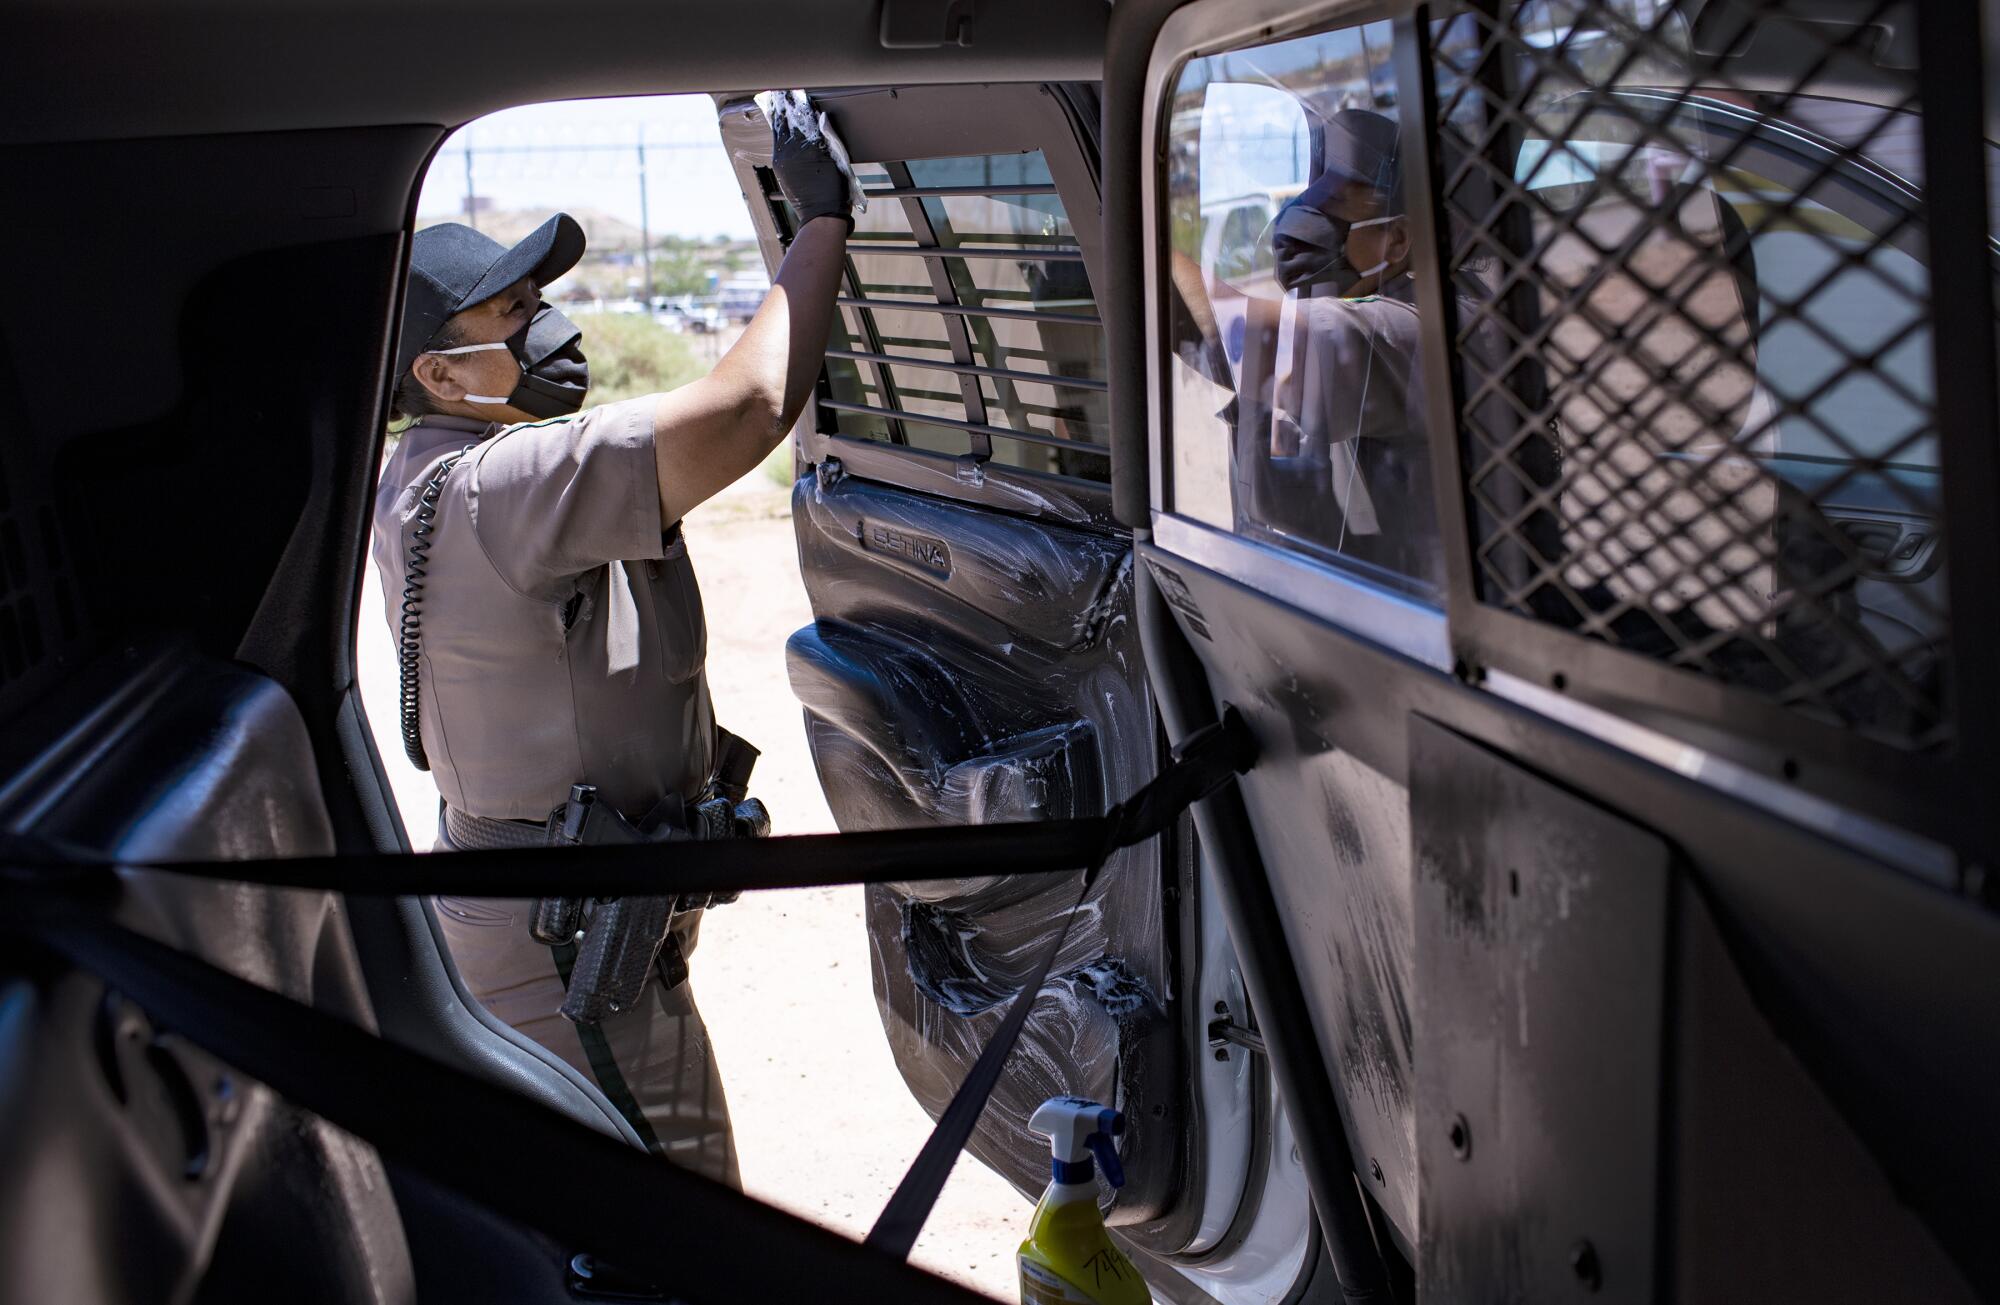 Officer Carolyn Tallsalt disinfects the back of her police vehicle after transporting a man to jail